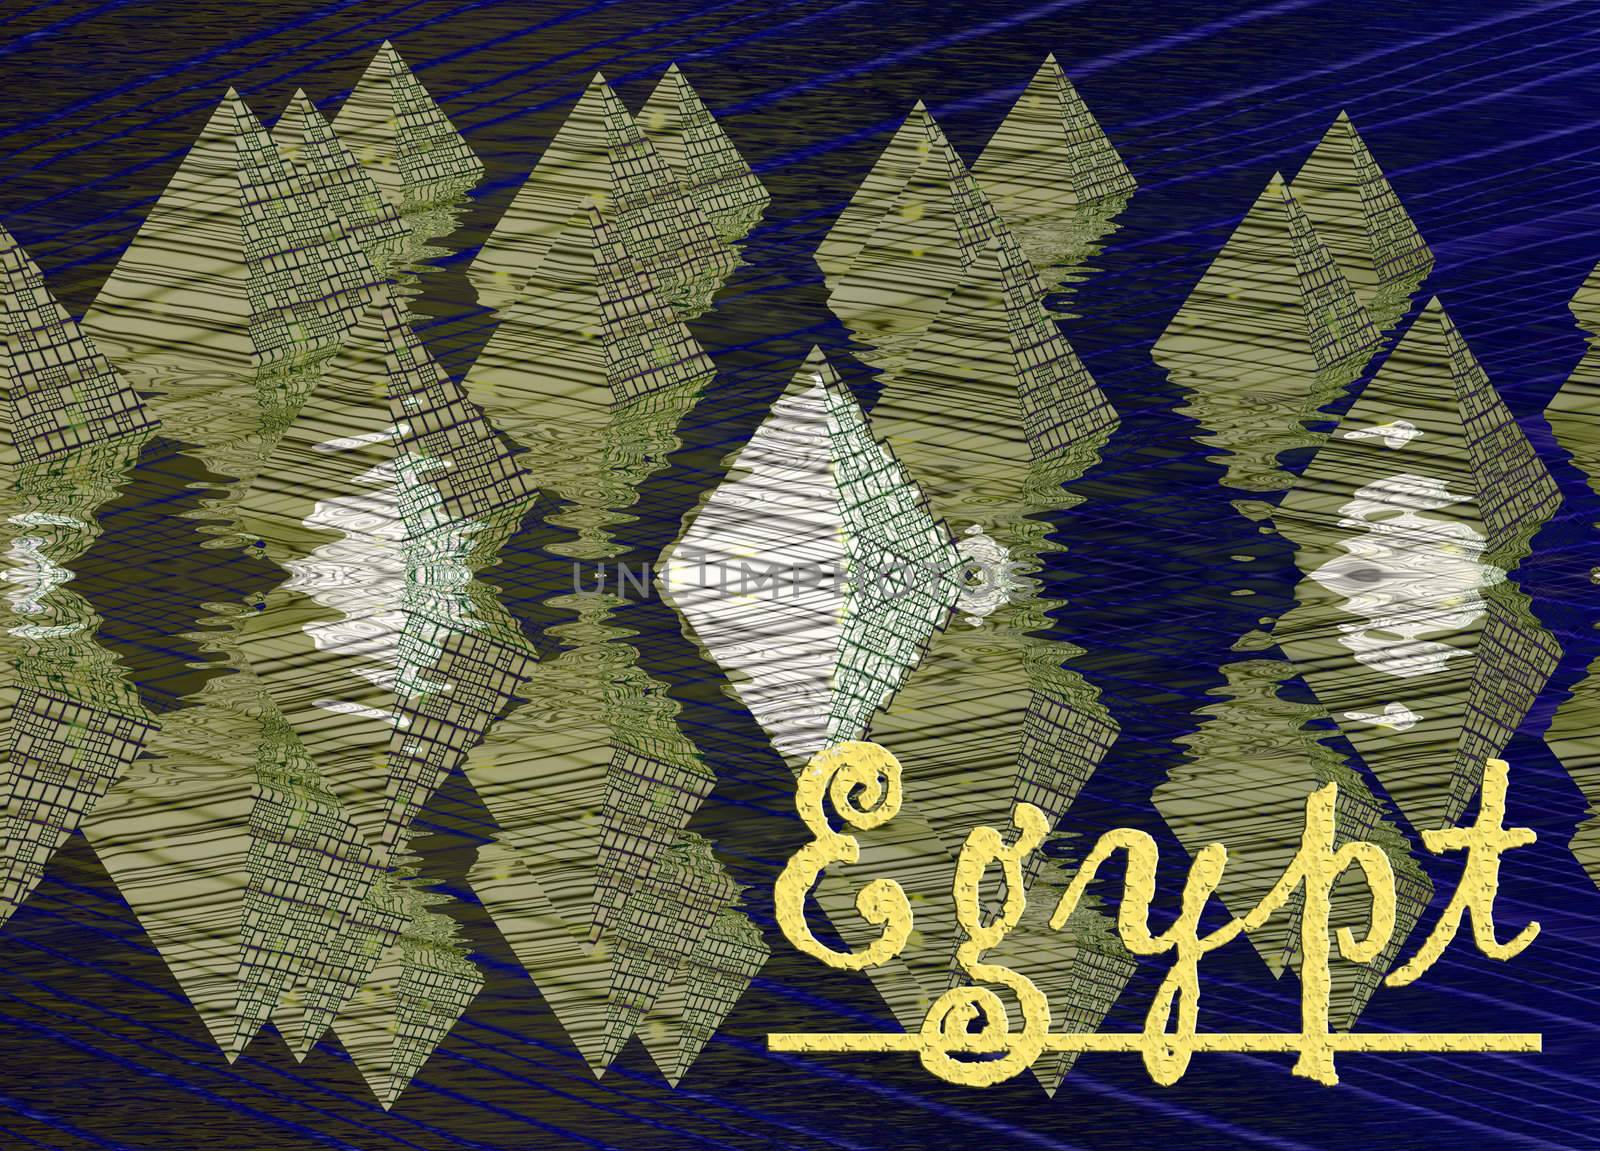 Yellow Pyramids and Reflections in Water with Egypt Text Illustration